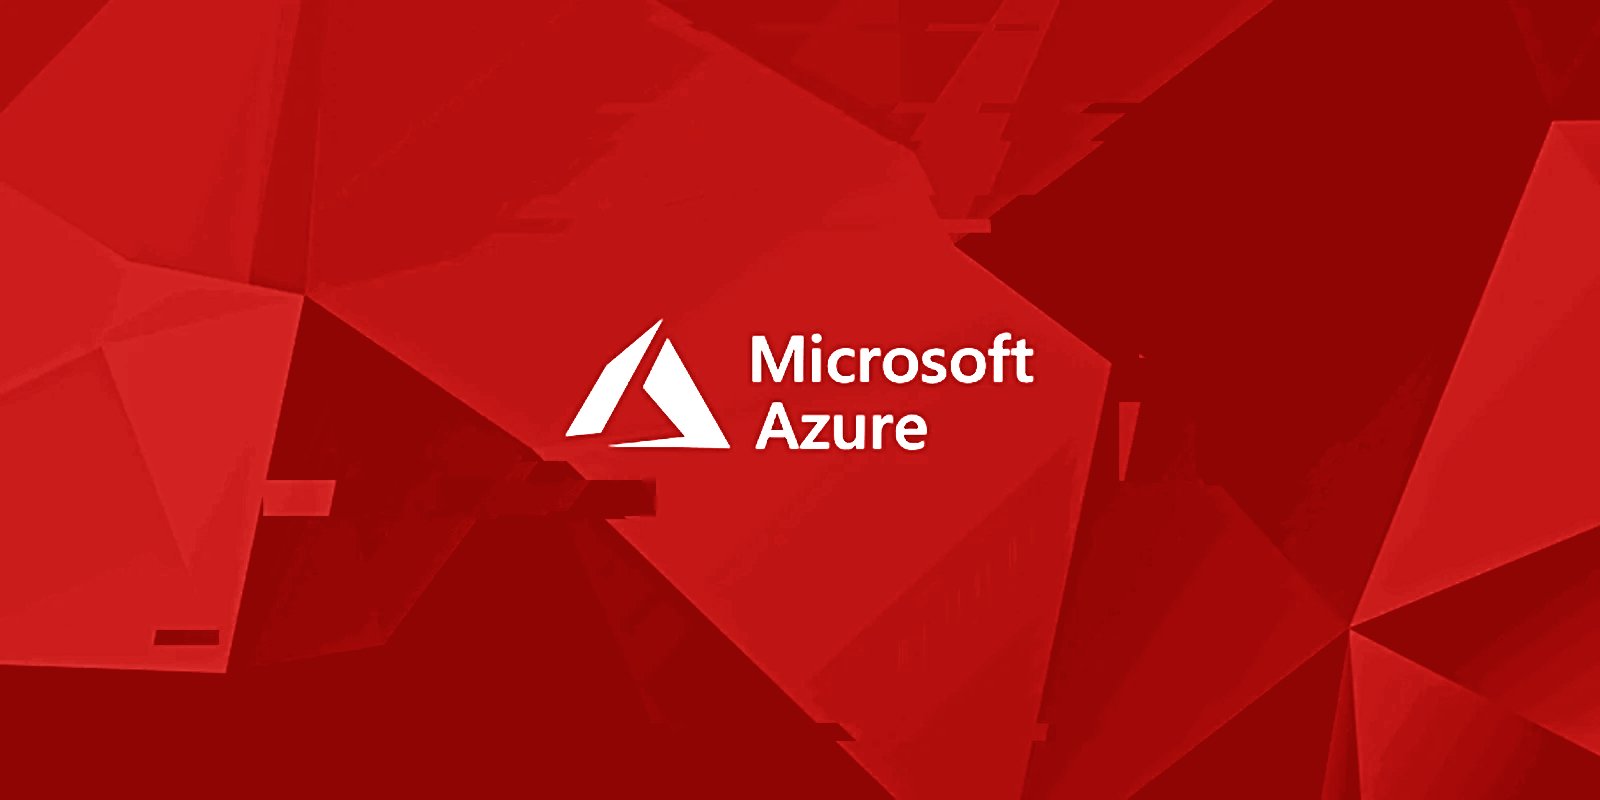 Microsoft leaks 38TB of private data via unsecured Azure storage – Source: www.bleepingcomputer.com